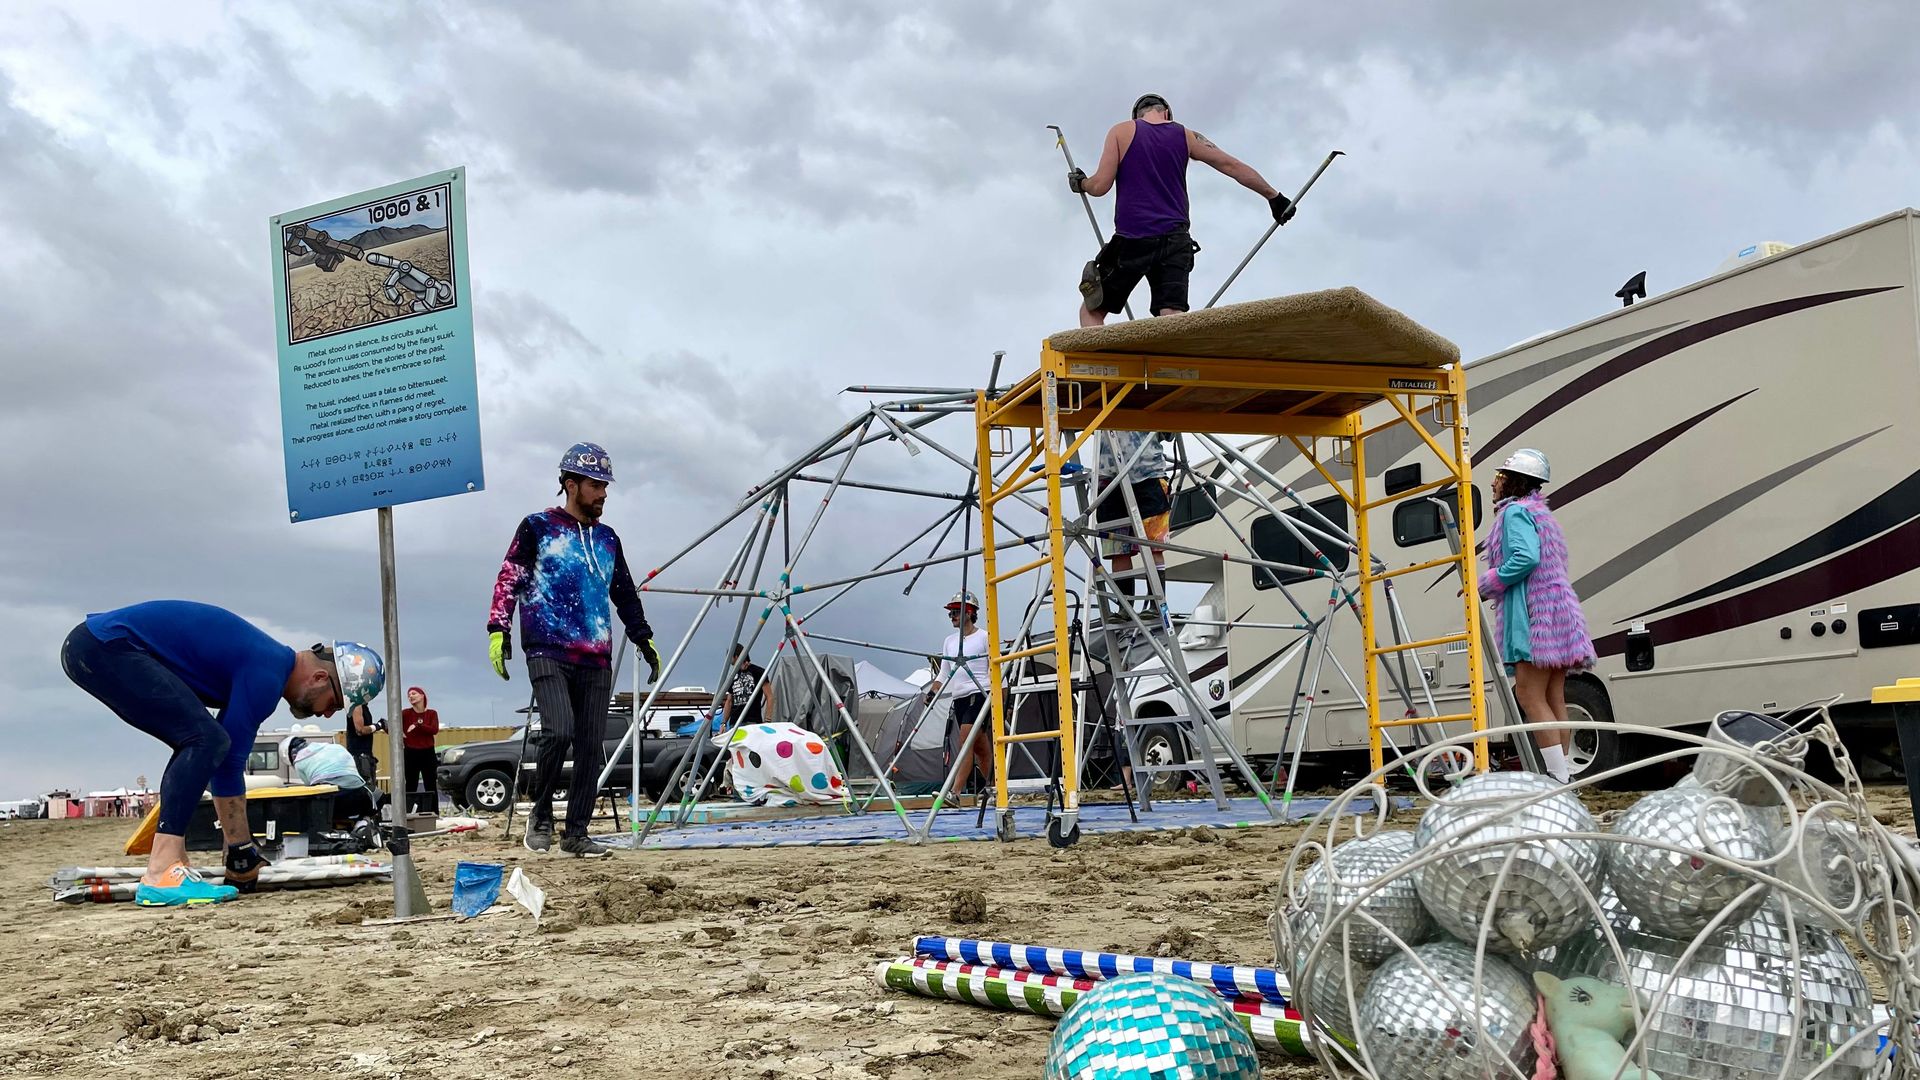 People take down a structure at Burning Man. Disco balls are in the foreground on the desert floor. 